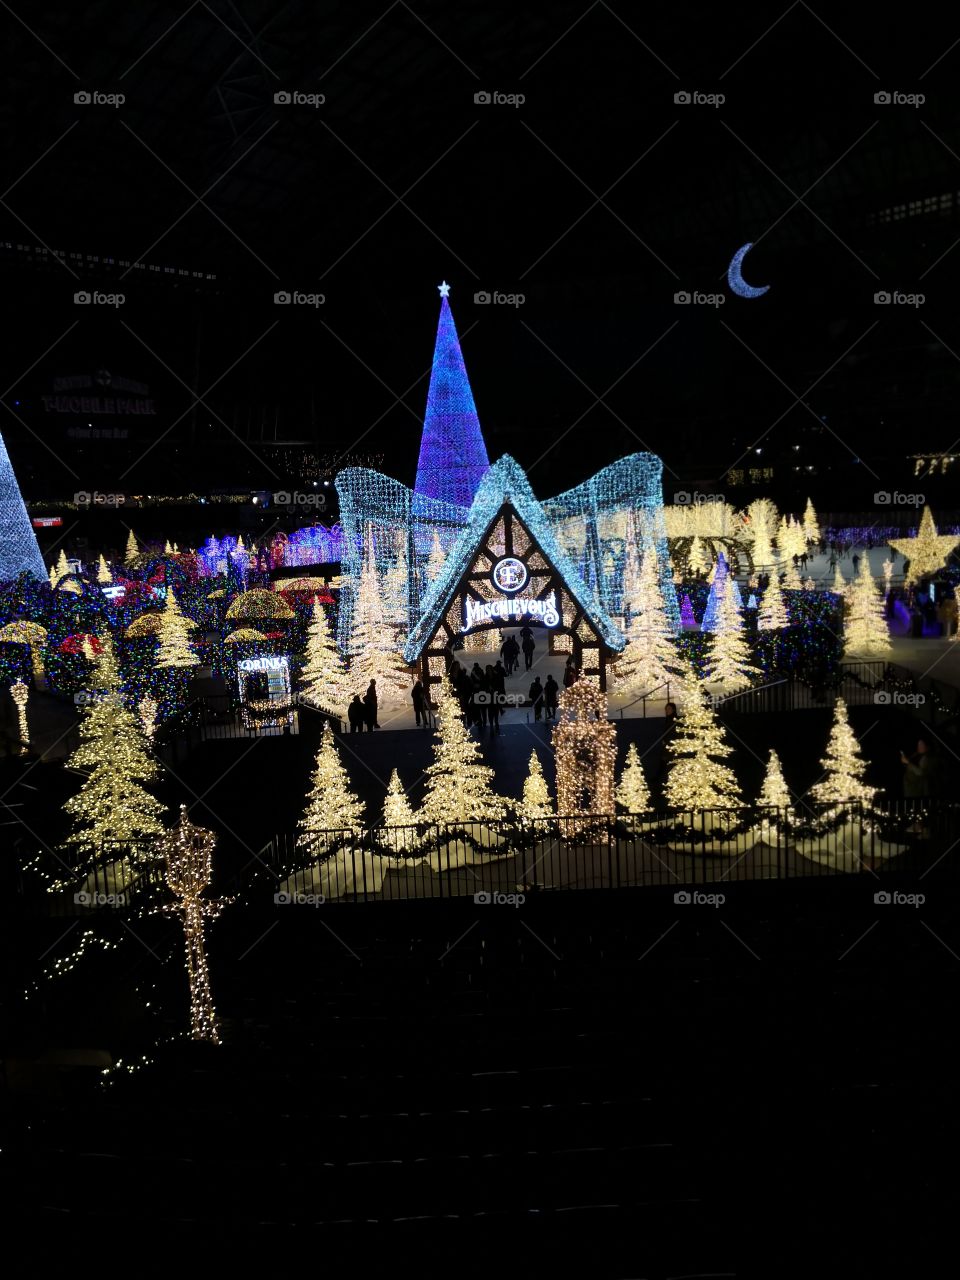 over view of the beautiful Christmas lights at the Enchantchristmas in Seattle, WA.